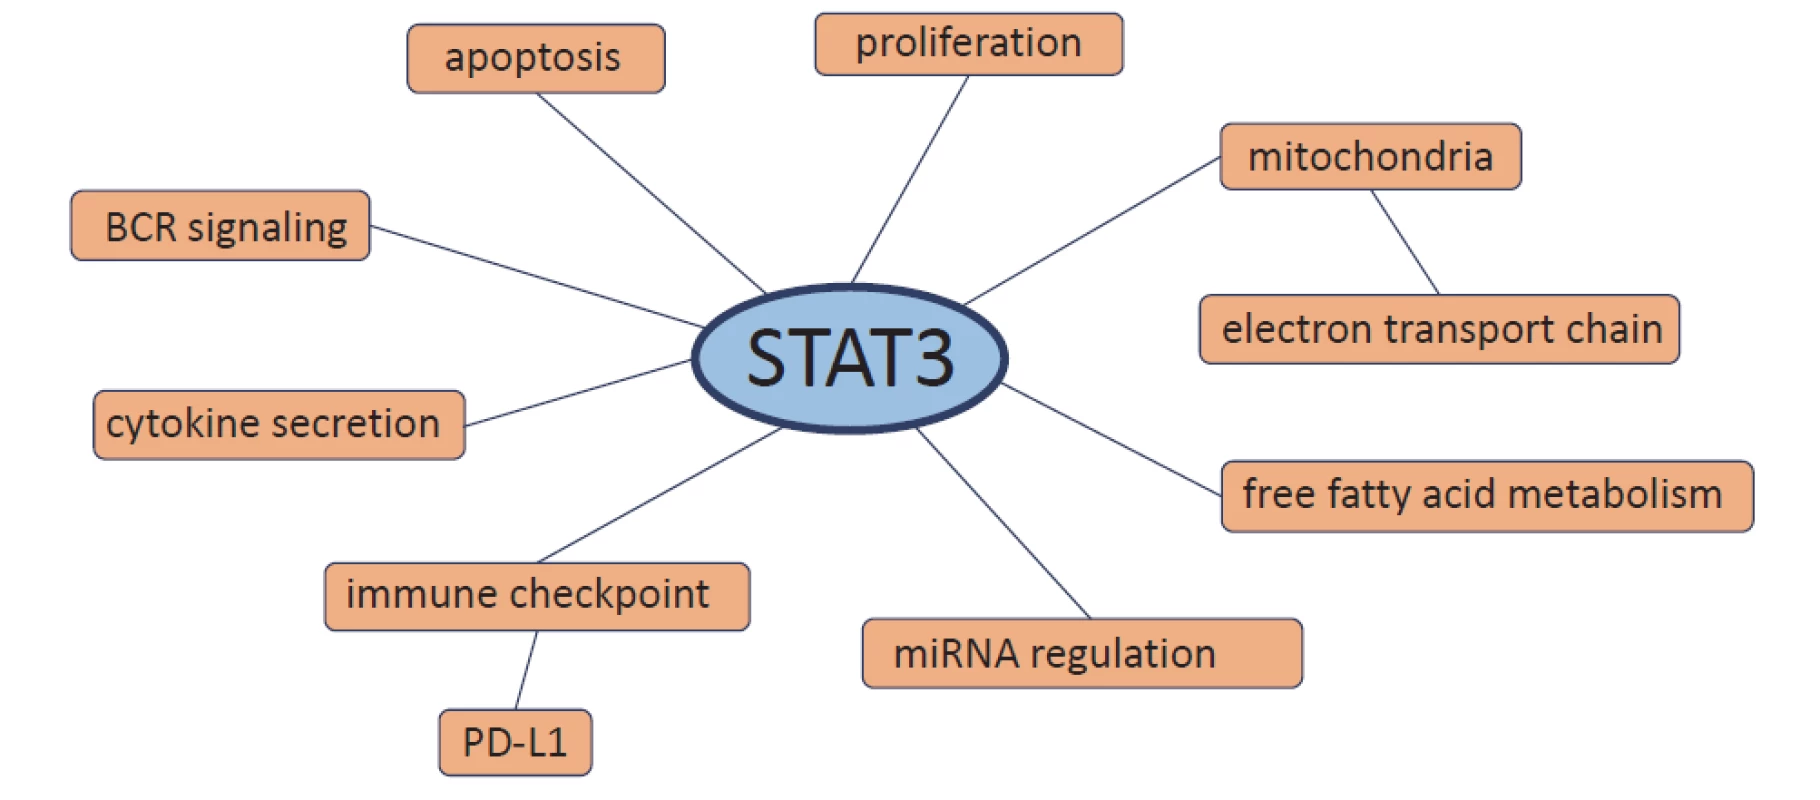 Processes in which STAT3 is involved in chronic lymphocytic leukemia cells.